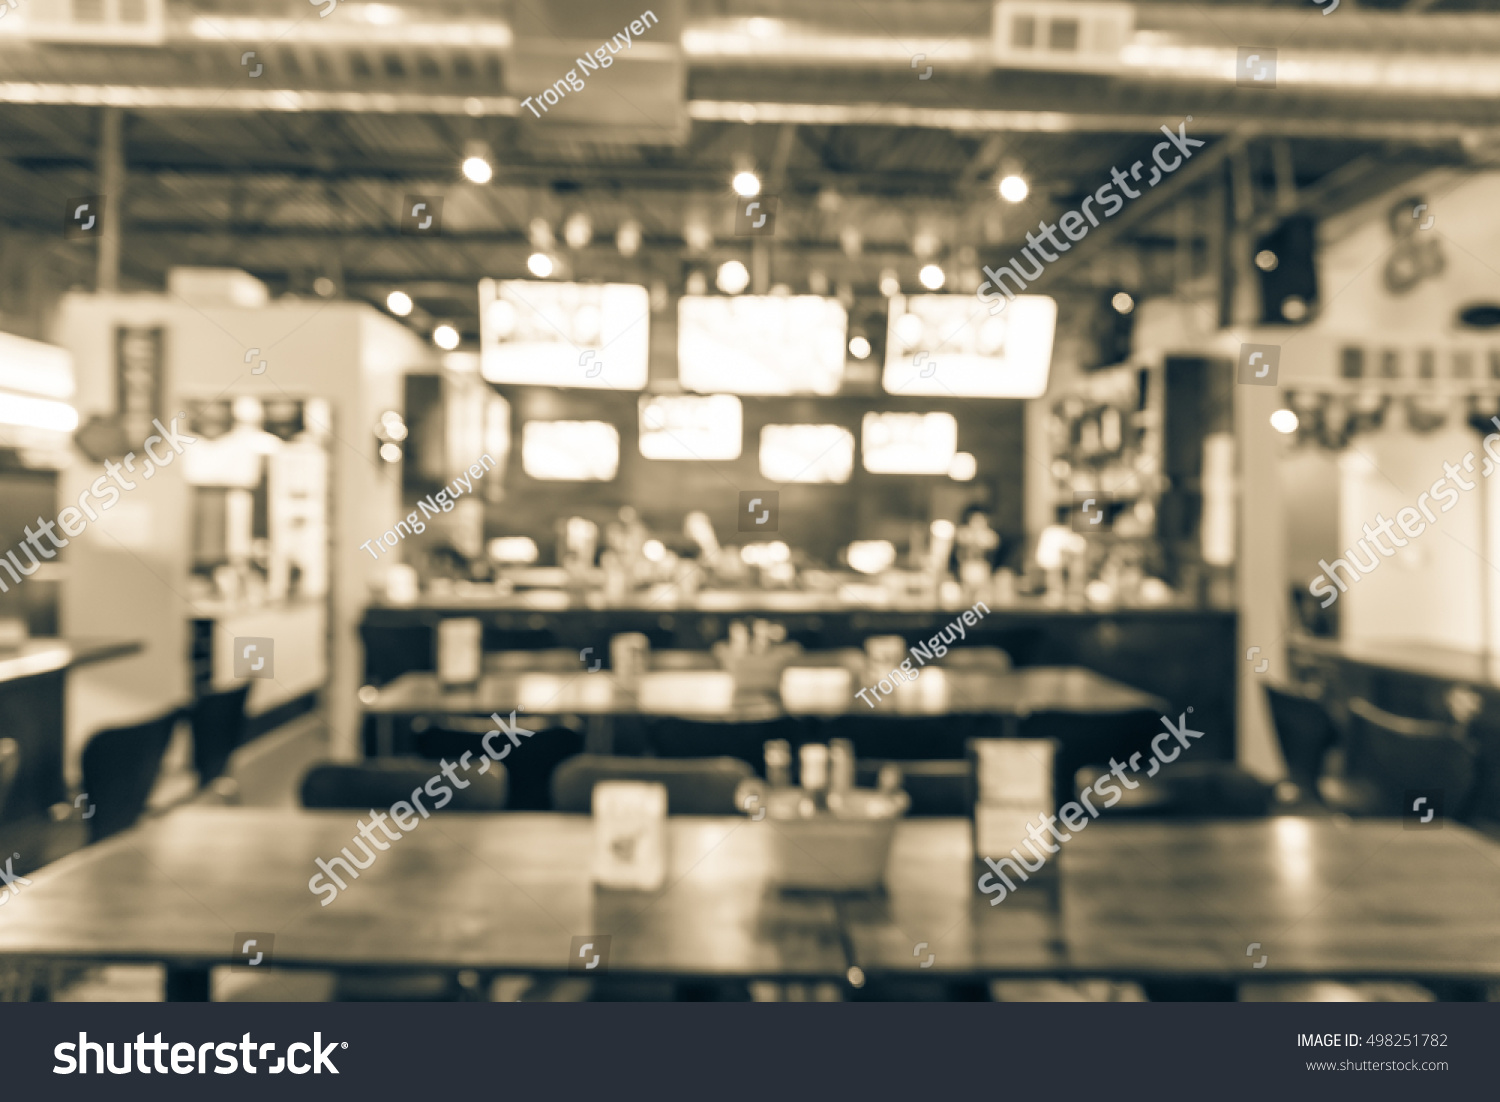 Blurred Image Sport Oyster Bar Tv Stock Photo Edit Now 498251782